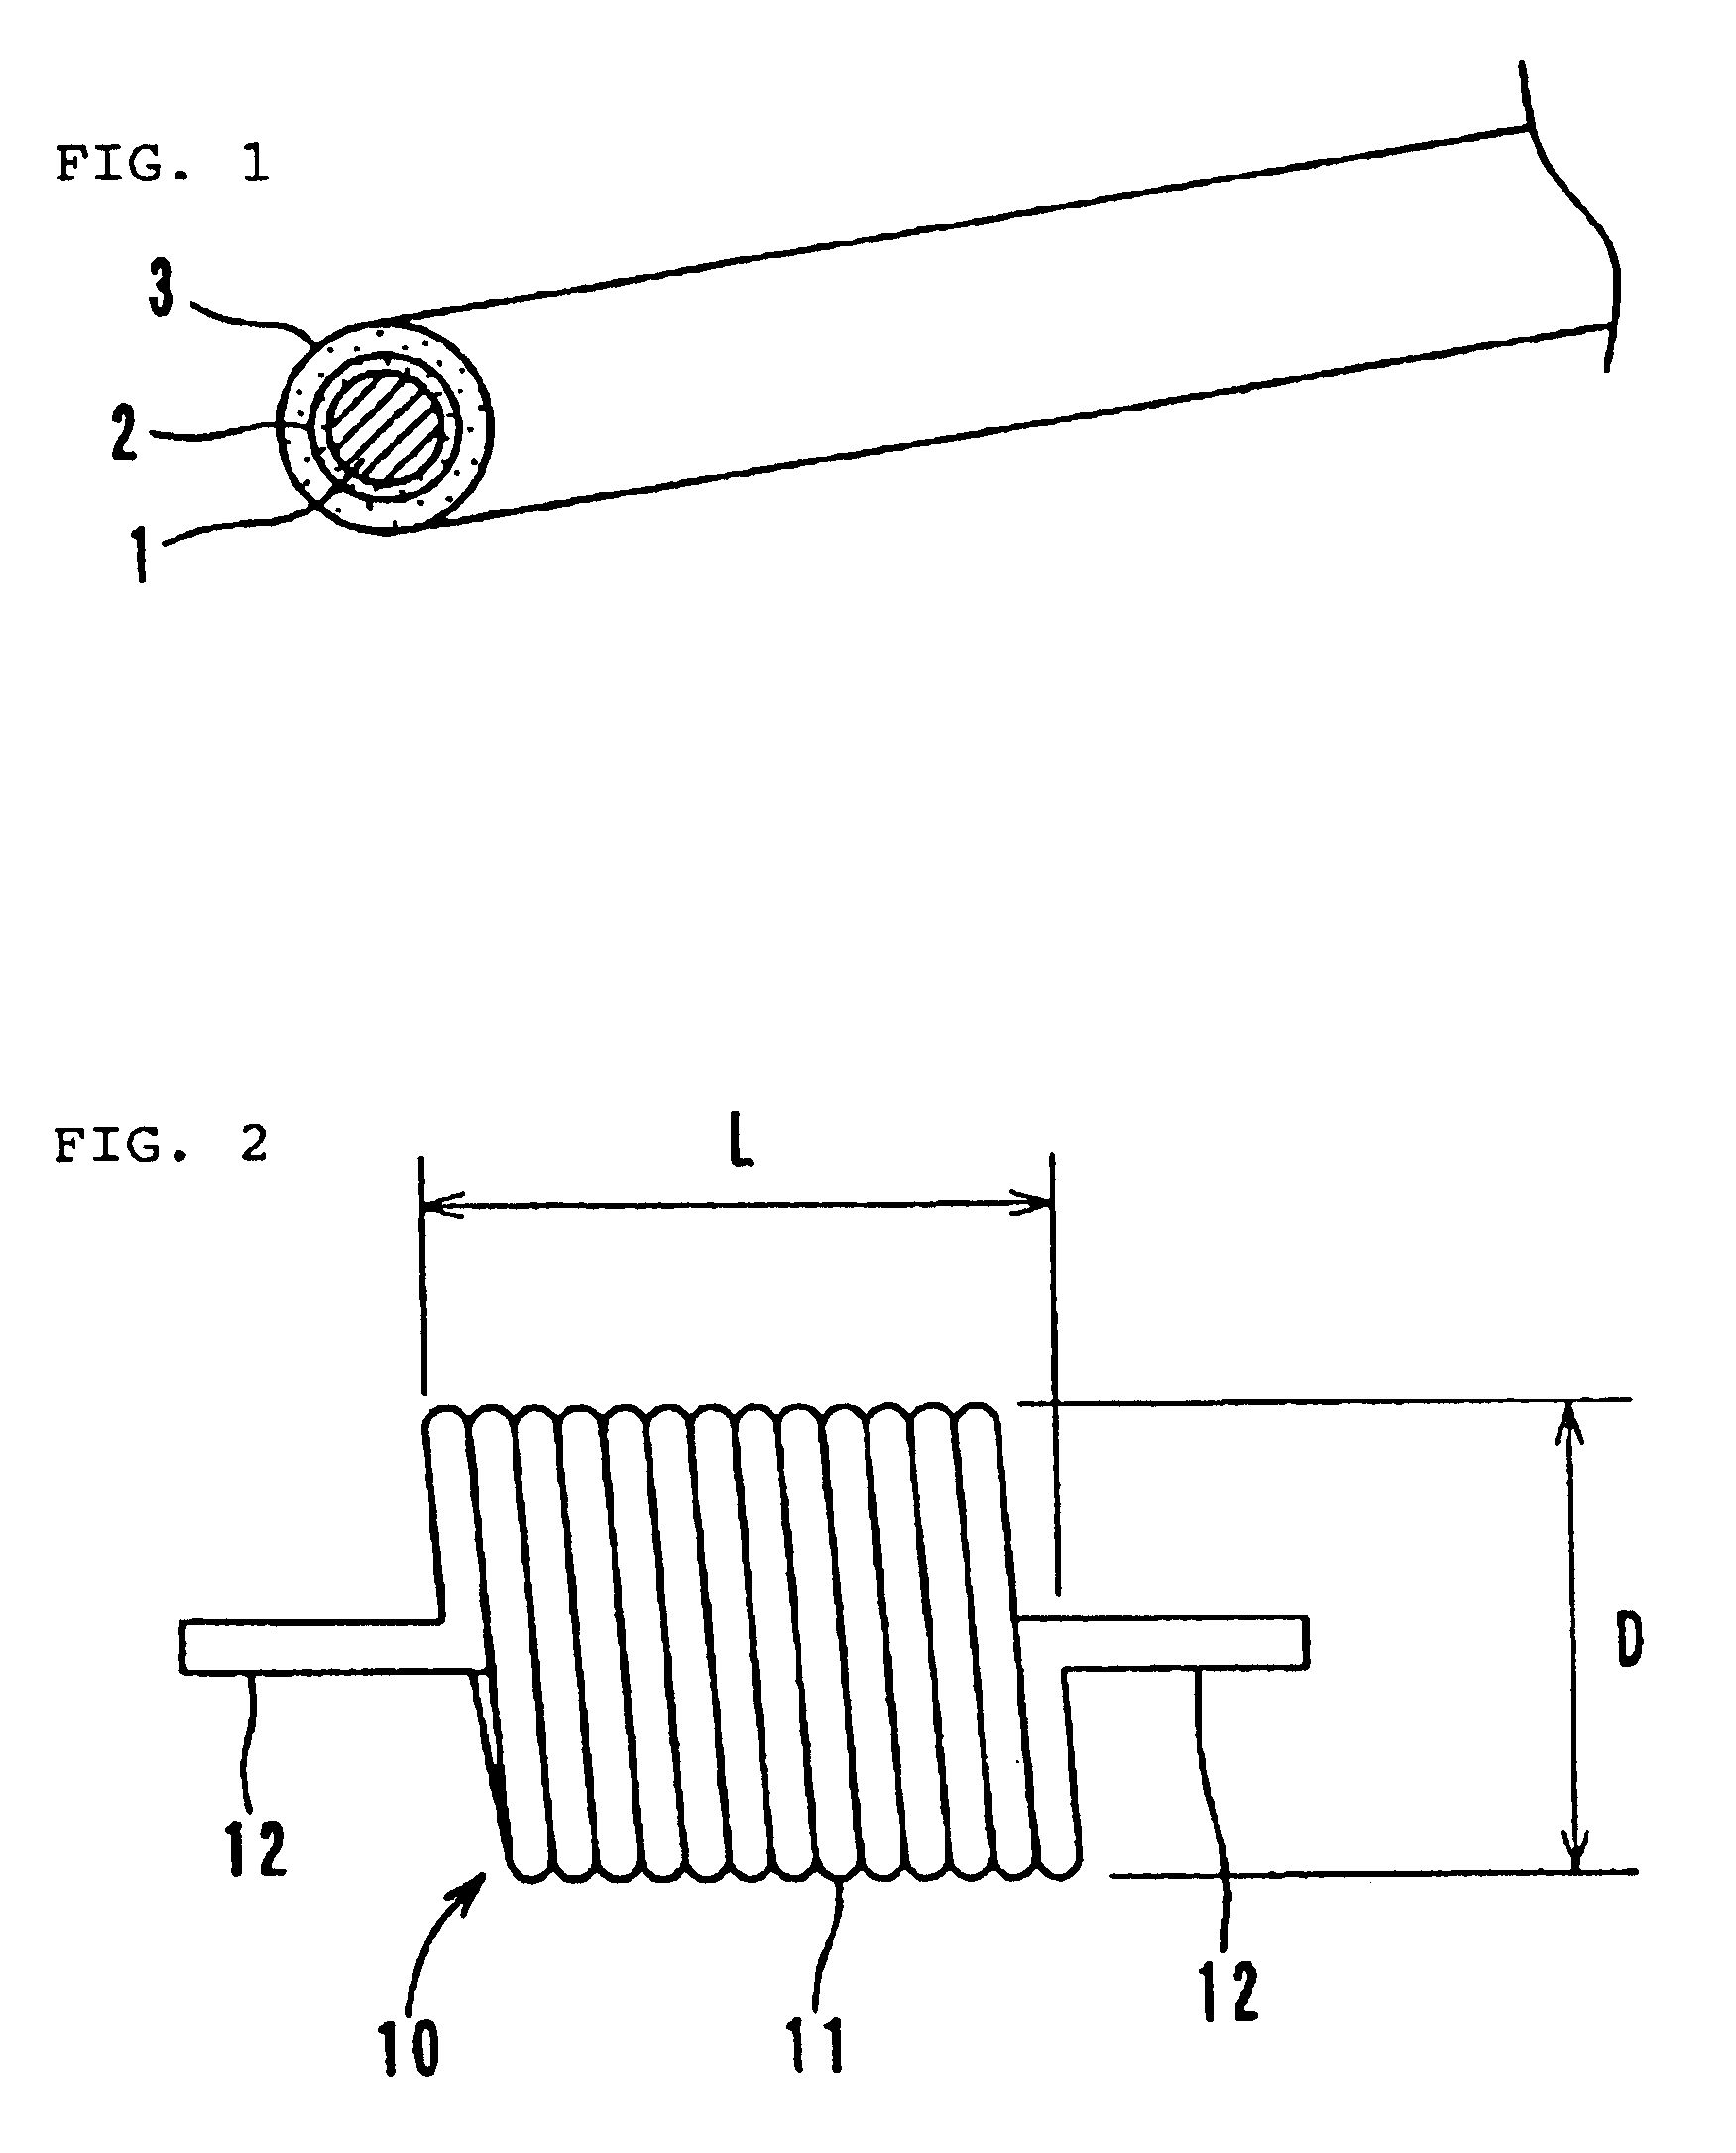 Method for manufacturing an inductor